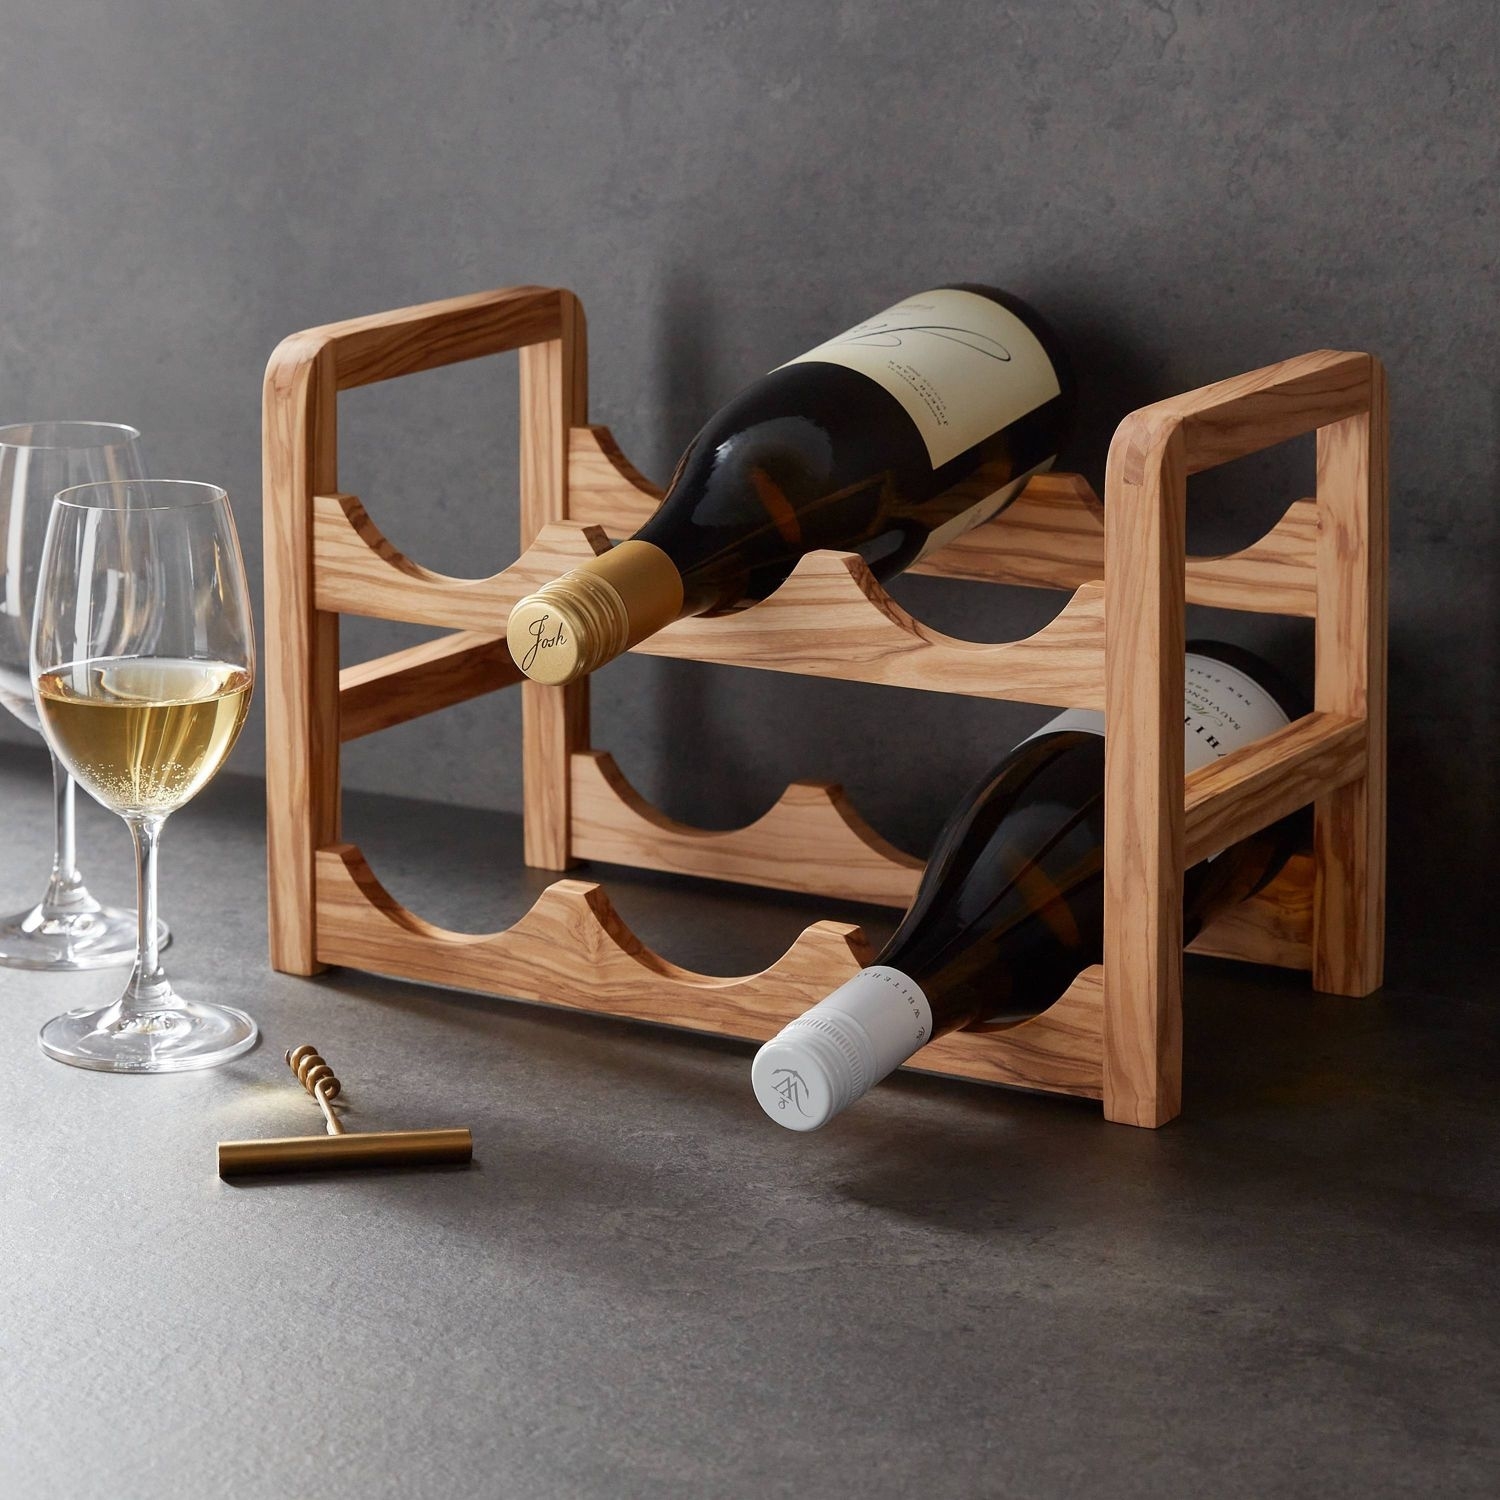 Two-tiered wine rack with two bottles on it